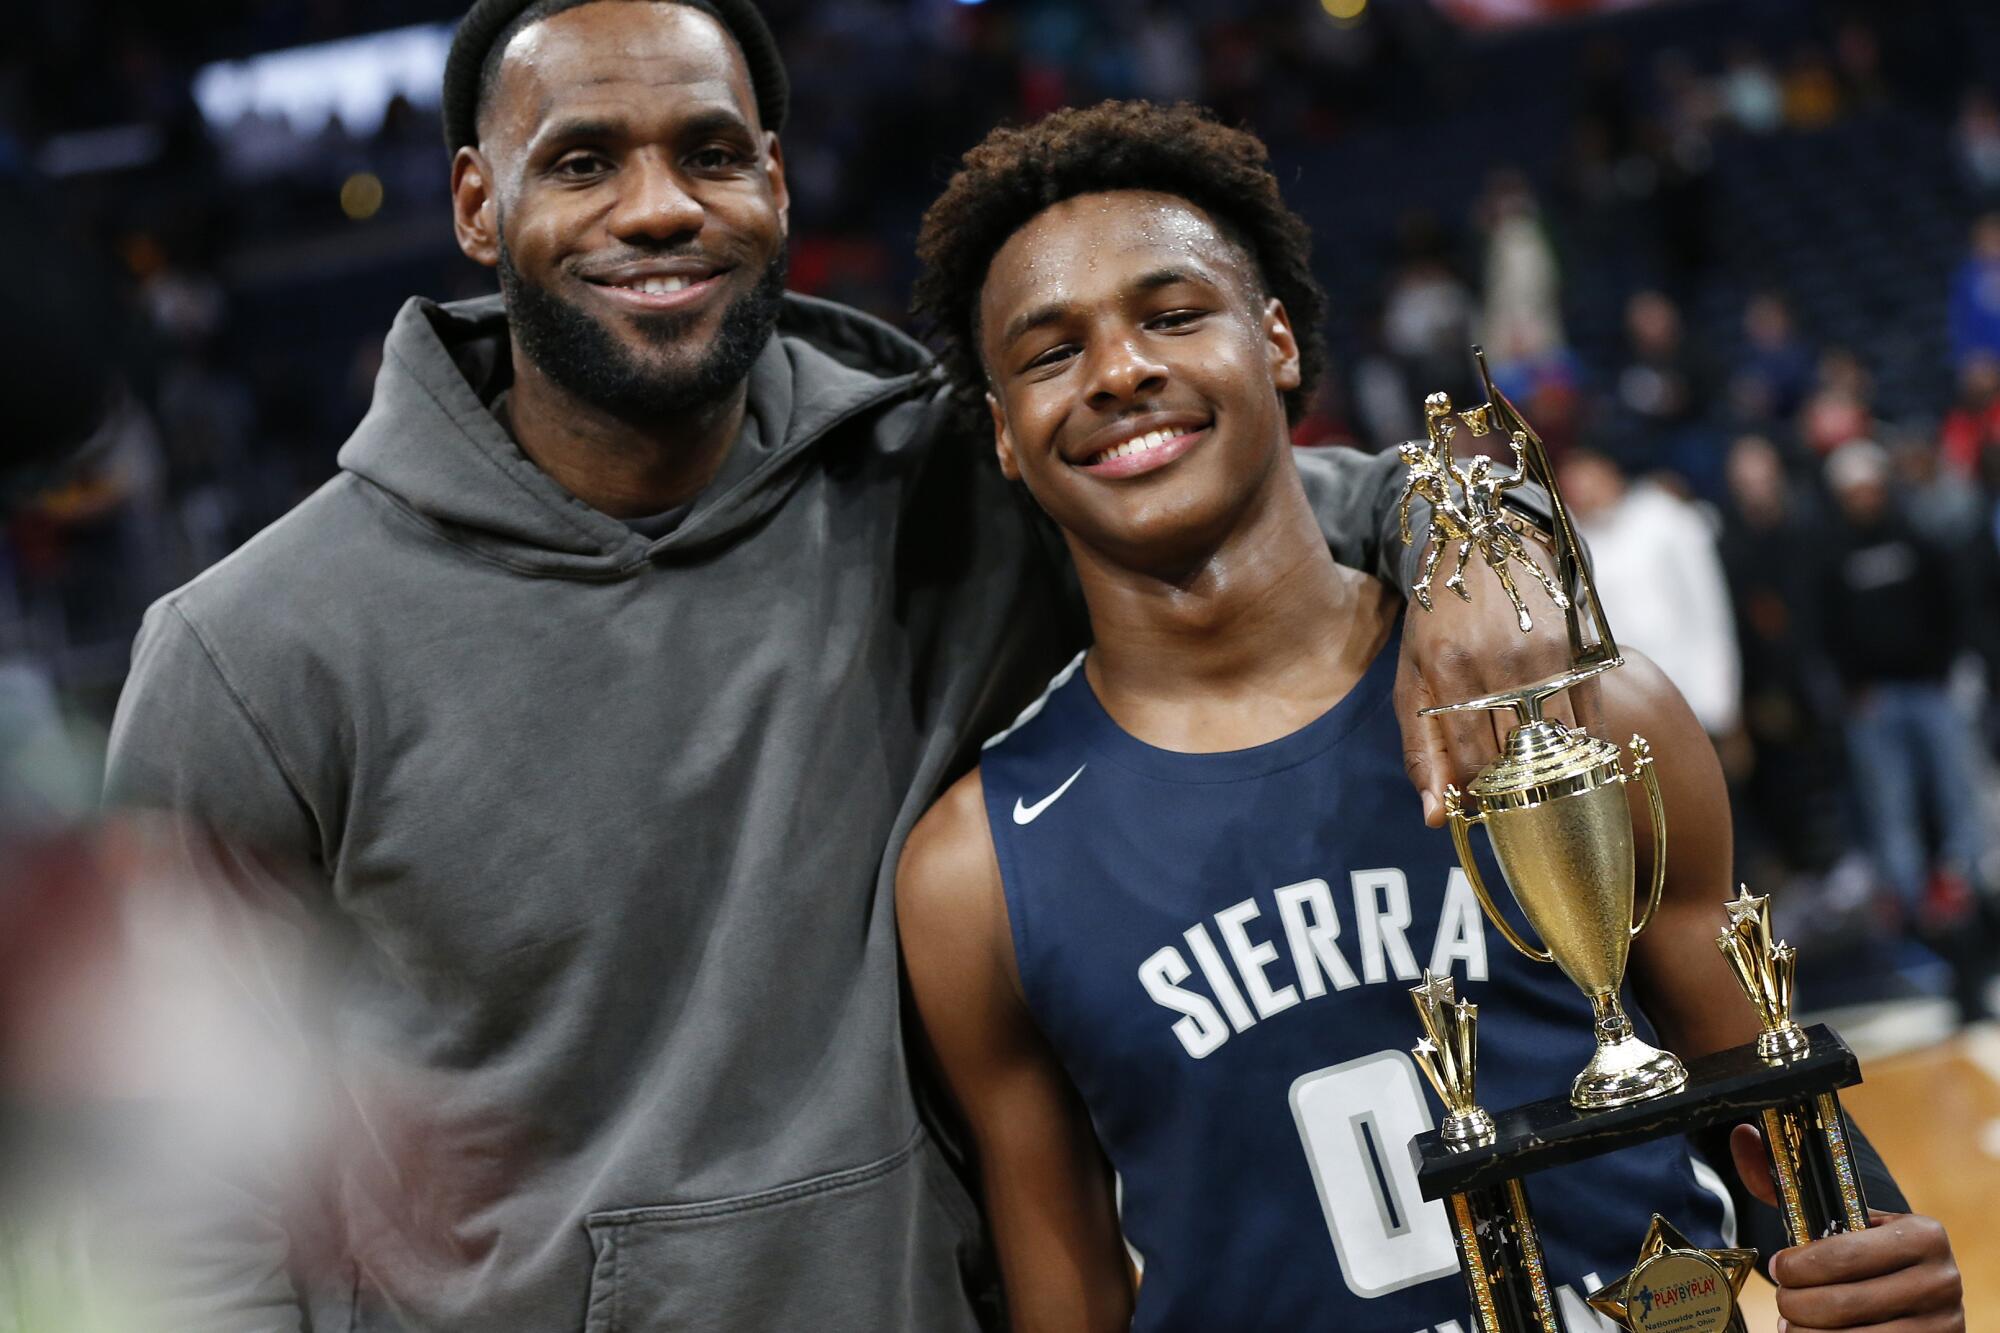 LeBron James poses for a photo next so son Bronny when he starred at Sierra Canyon High.